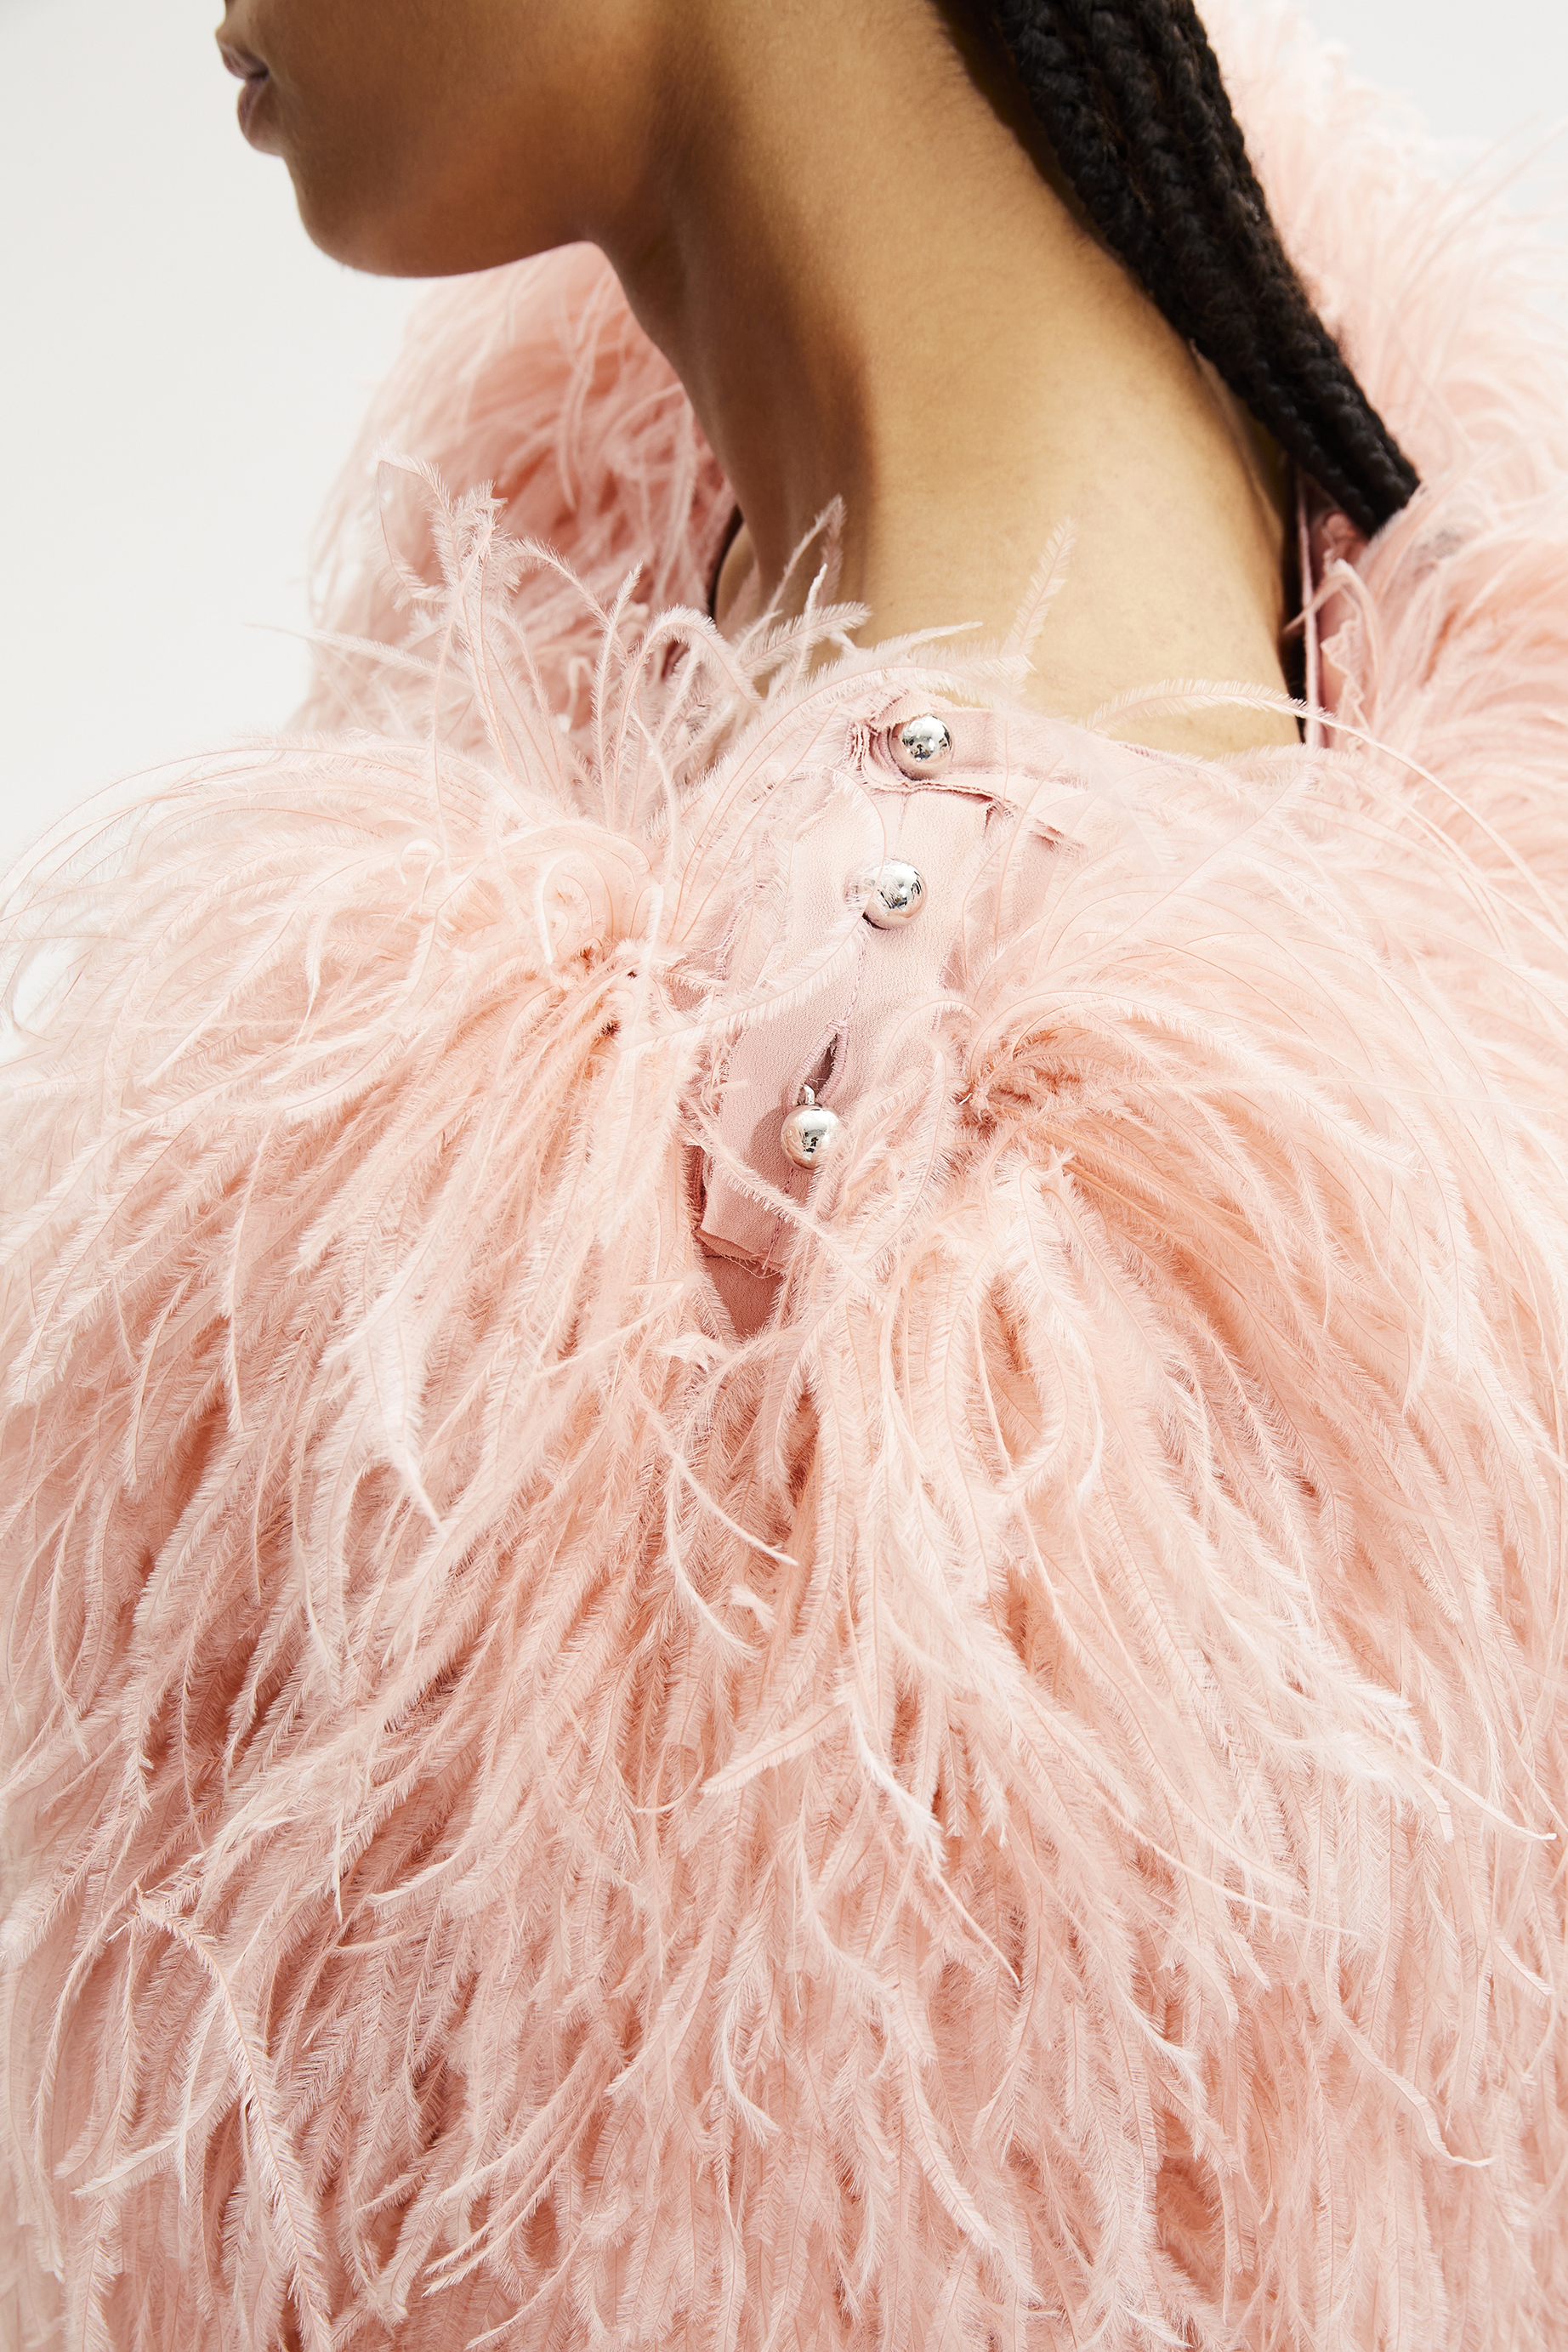 Why You Should Try an Ostrich Feather Dress for a Glamorous and Chic Look, by Andyjou